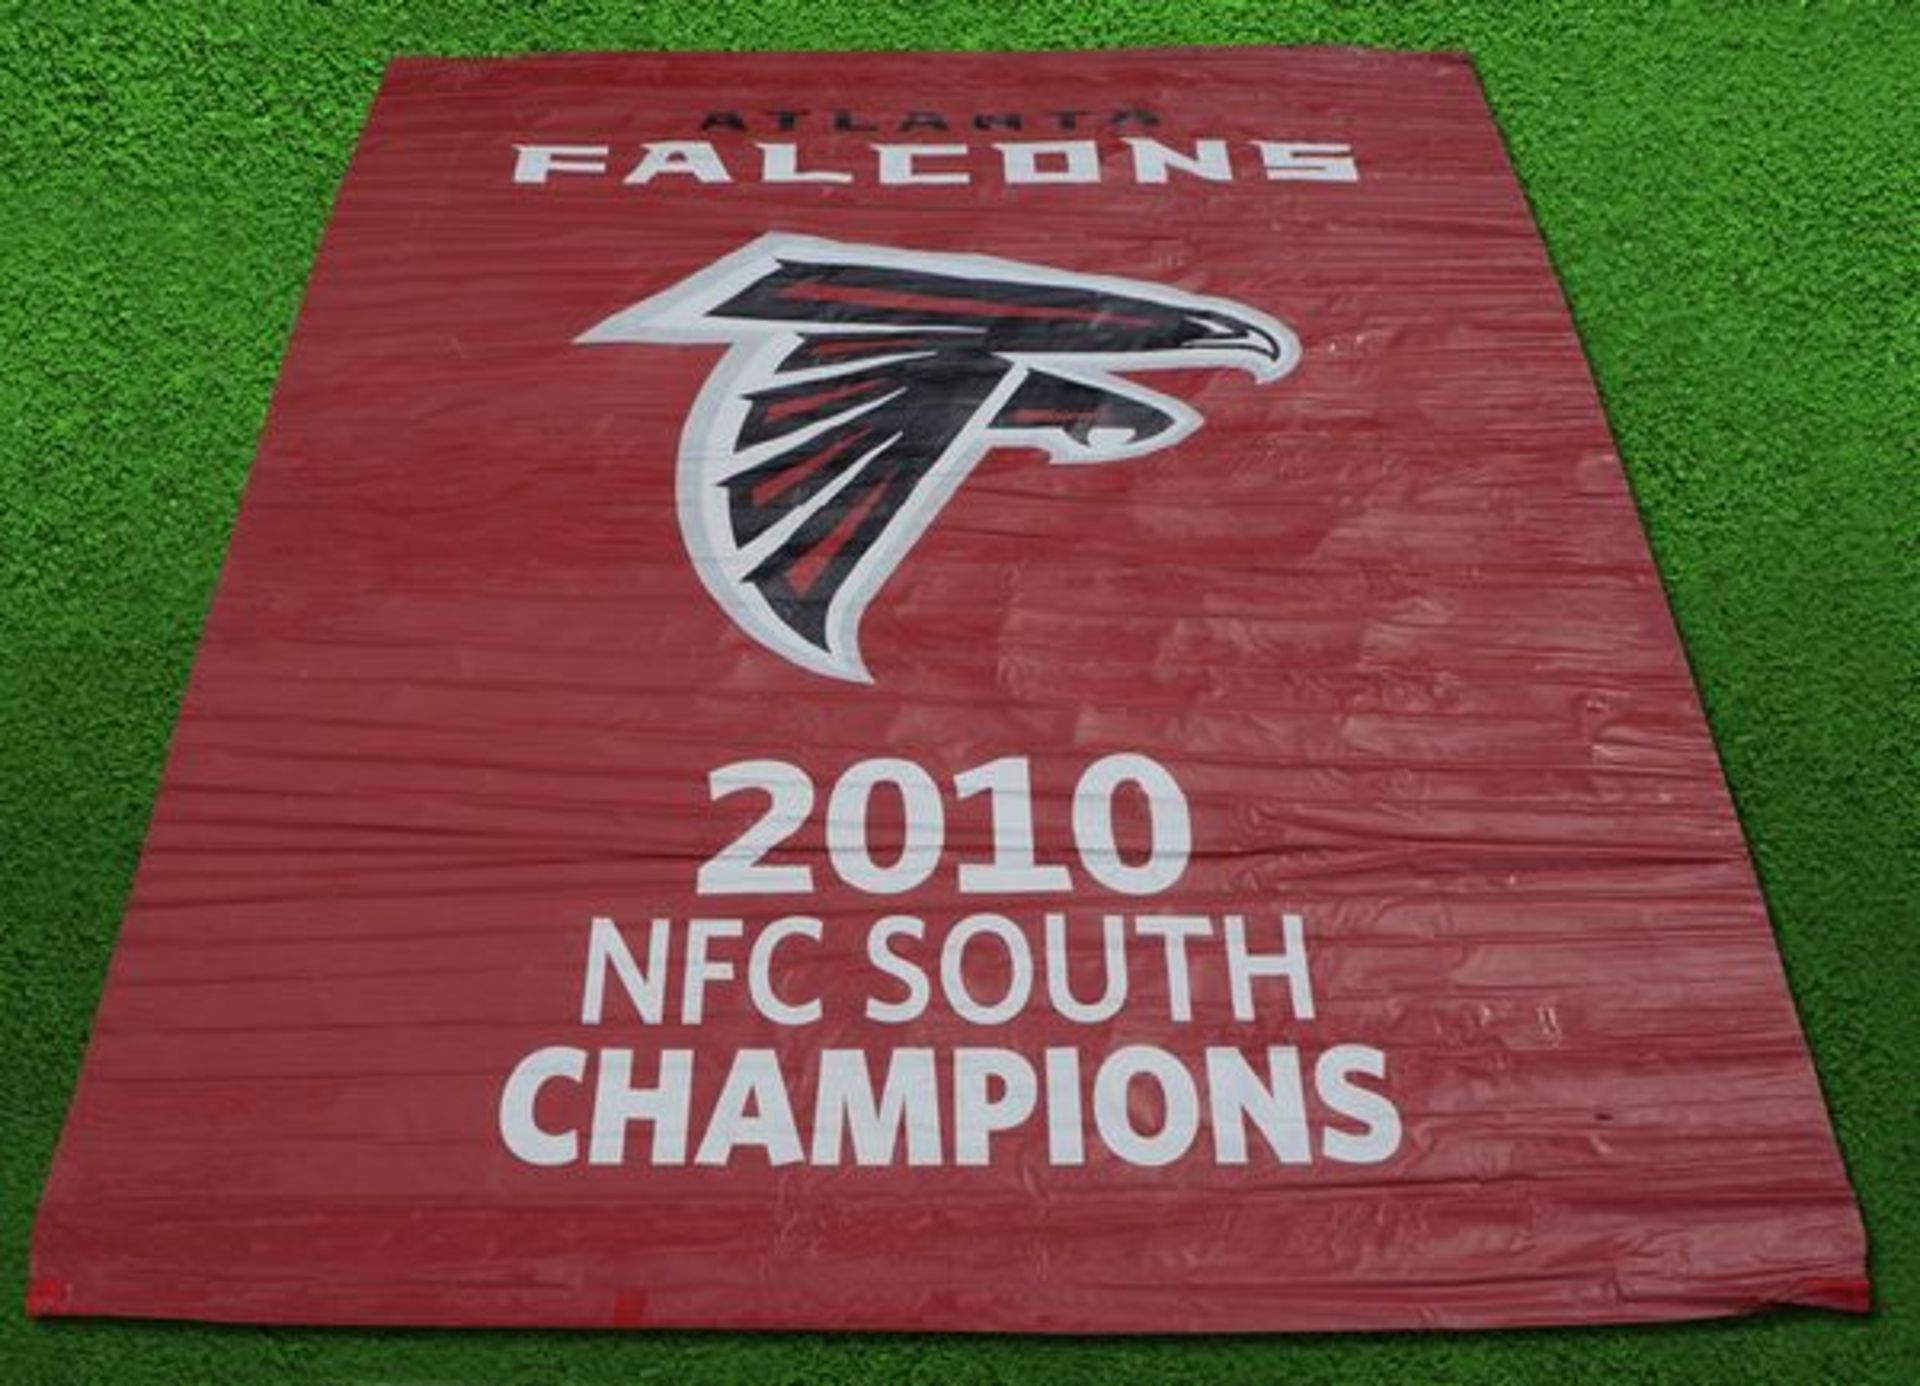 2010 NFC SOUTH, FALCONS CHAMPIONS BANNER / Authentic & Historic Banner Hung in GA Dome Rafters /